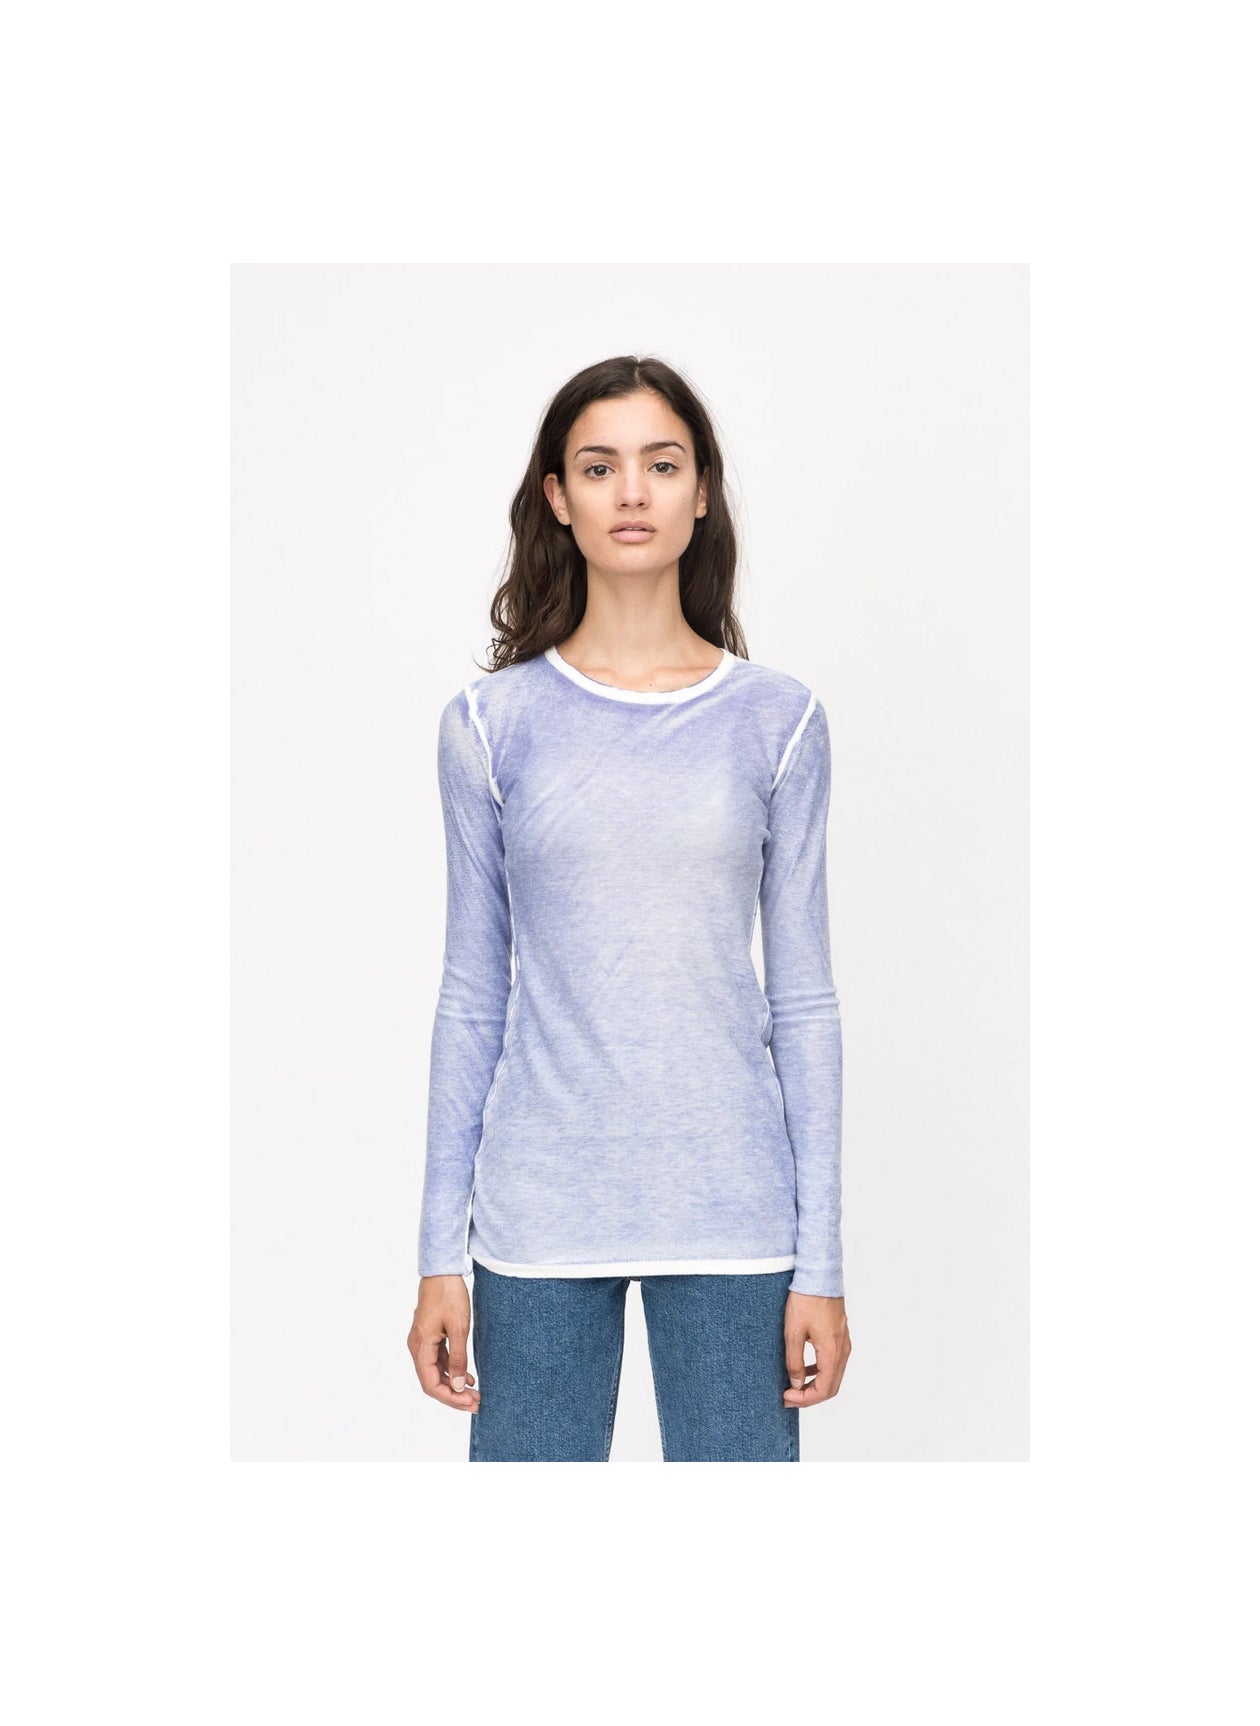 OVERDYED FITTED CREW NECK BAMBOO CASHMERE SWEATER - IRIS